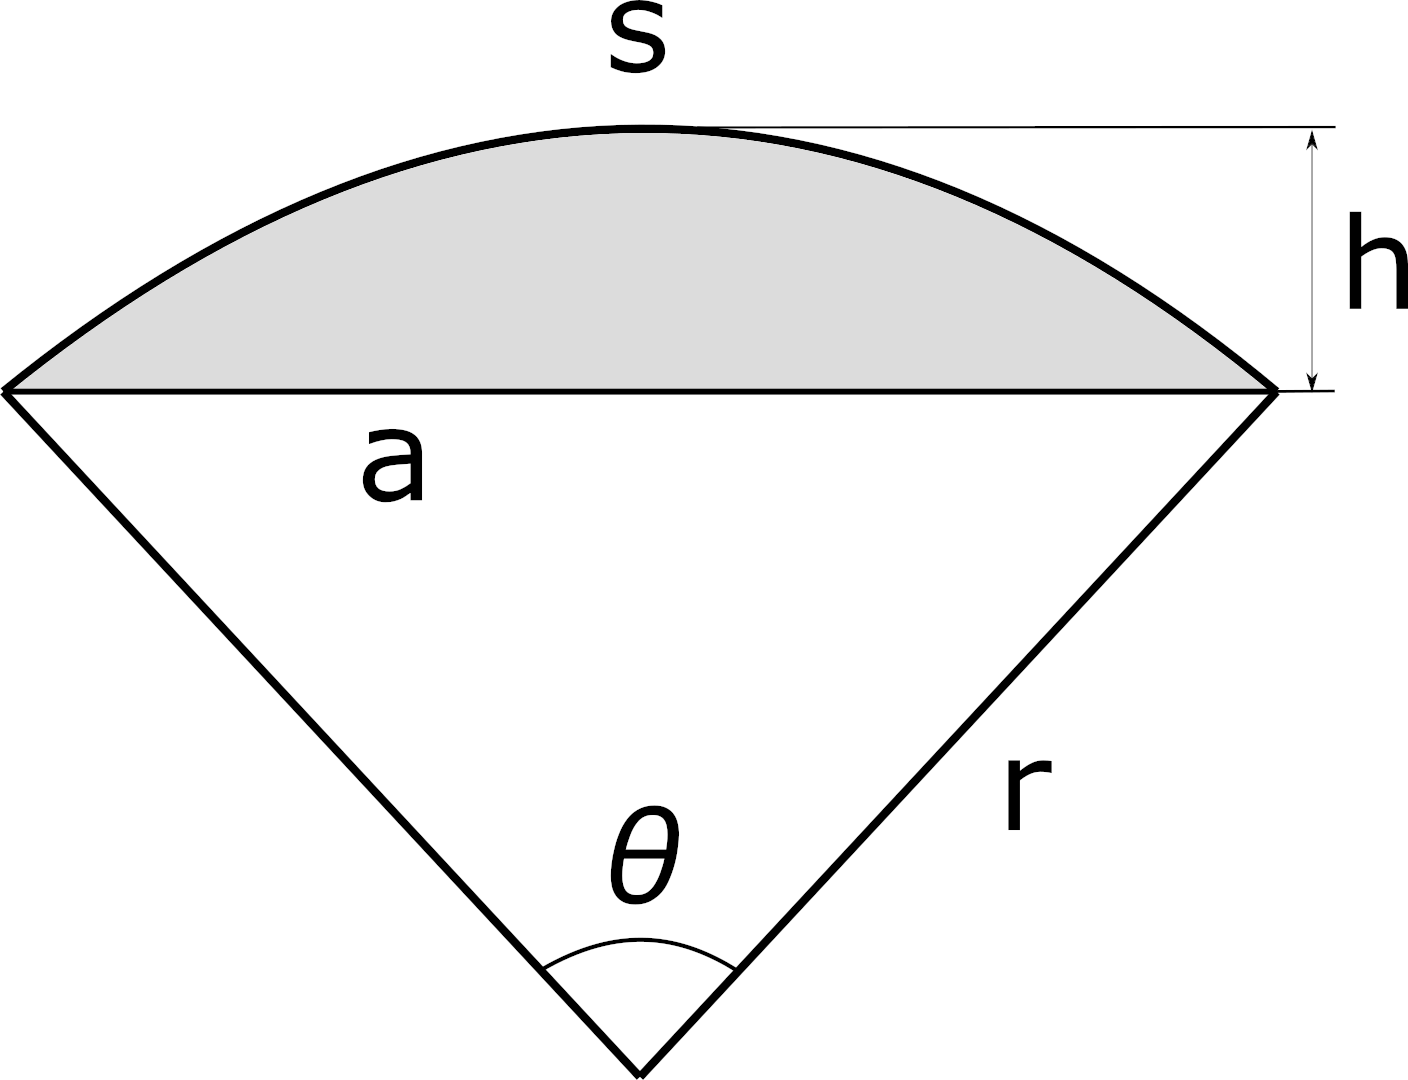 Diagram of a circular segment showing the radius, central angle, chord length, height, and arc length